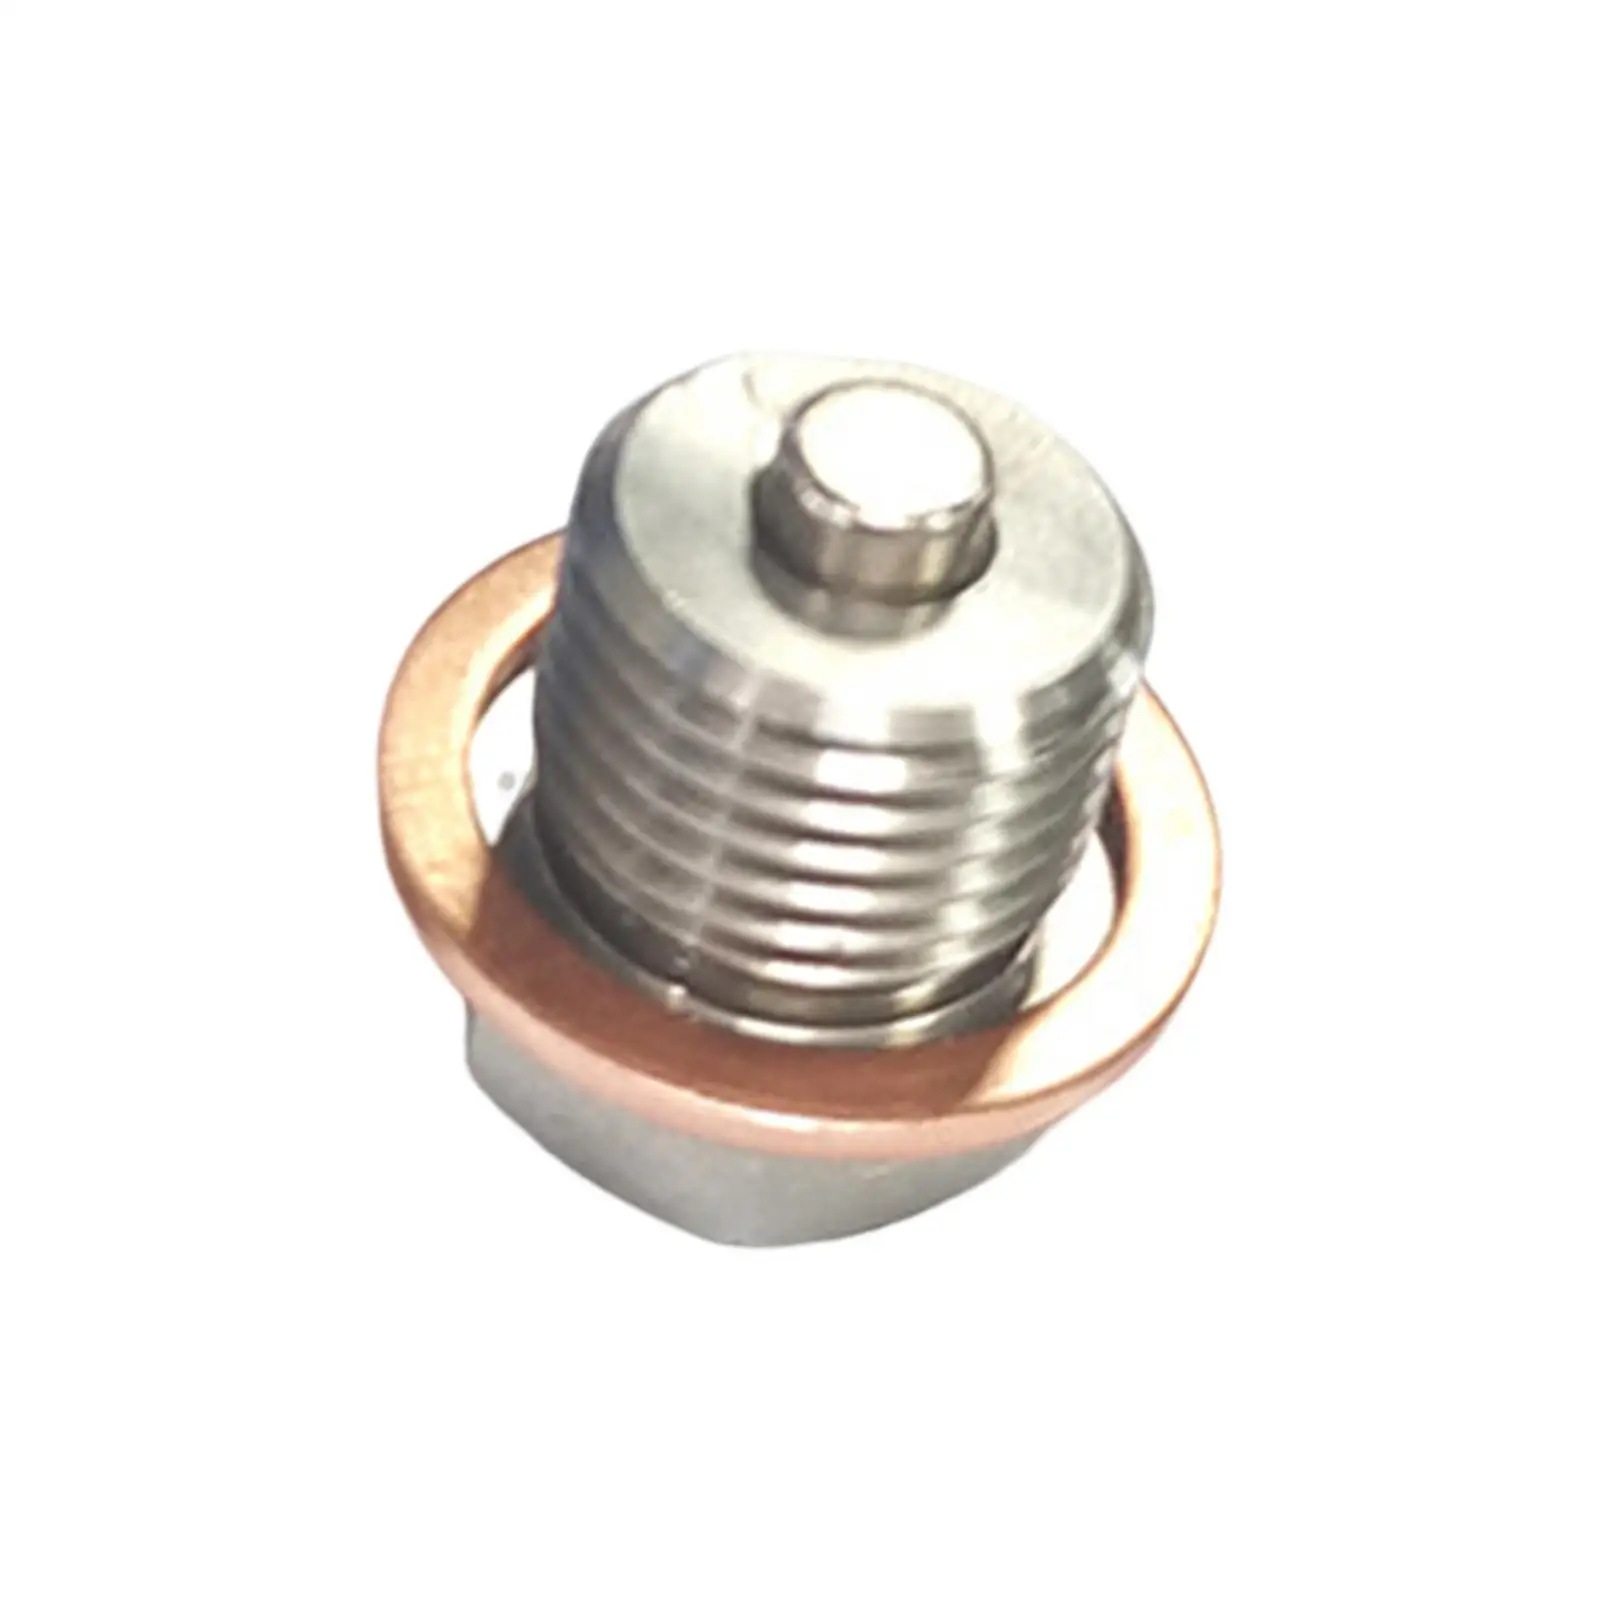 Oil Drain Plug Screw M12x1.75 Easy to Install Replace with Cooper Washer Accessory Neodymium Magnet Bolt for Motorcycle Car